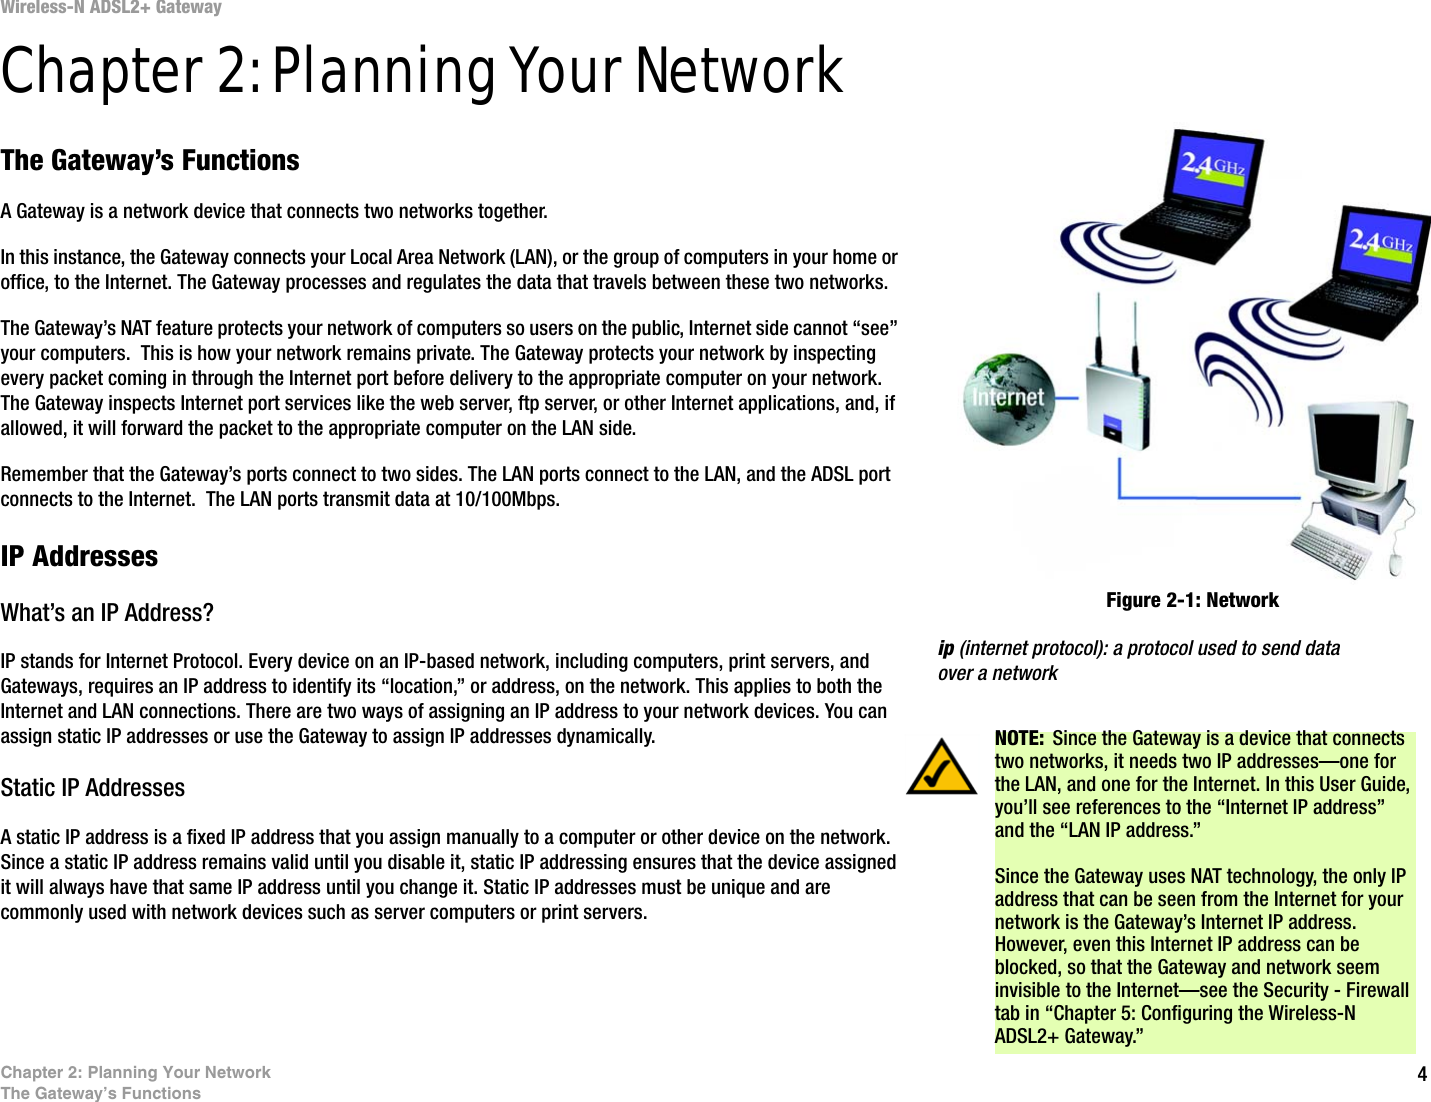 4Chapter 2: Planning Your NetworkThe Gateway’s FunctionsWireless-N ADSL2+ GatewayChapter 2: Planning Your NetworkThe Gateway’s FunctionsA Gateway is a network device that connects two networks together. In this instance, the Gateway connects your Local Area Network (LAN), or the group of computers in your home or office, to the Internet. The Gateway processes and regulates the data that travels between these two networks.The Gateway’s NAT feature protects your network of computers so users on the public, Internet side cannot “see” your computers.  This is how your network remains private. The Gateway protects your network by inspecting every packet coming in through the Internet port before delivery to the appropriate computer on your network. The Gateway inspects Internet port services like the web server, ftp server, or other Internet applications, and, if allowed, it will forward the packet to the appropriate computer on the LAN side.Remember that the Gateway’s ports connect to two sides. The LAN ports connect to the LAN, and the ADSL port connects to the Internet.  The LAN ports transmit data at 10/100Mbps.IP AddressesWhat’s an IP Address?IP stands for Internet Protocol. Every device on an IP-based network, including computers, print servers, and Gateways, requires an IP address to identify its “location,” or address, on the network. This applies to both the Internet and LAN connections. There are two ways of assigning an IP address to your network devices. You can assign static IP addresses or use the Gateway to assign IP addresses dynamically.Static IP Addresses  A static IP address is a fixed IP address that you assign manually to a computer or other device on the network. Since a static IP address remains valid until you disable it, static IP addressing ensures that the device assigned it will always have that same IP address until you change it. Static IP addresses must be unique and are commonly used with network devices such as server computers or print servers.NOTE: Since the Gateway is a device that connects two networks, it needs two IP addresses—one for the LAN, and one for the Internet. In this User Guide, you’ll see references to the “Internet IP address” and the “LAN IP address.”Since the Gateway uses NAT technology, the only IP address that can be seen from the Internet for your network is the Gateway’s Internet IP address. However, even this Internet IP address can be blocked, so that the Gateway and network seem invisible to the Internet—see the Security - Firewall tab in “Chapter 5: Configuring the Wireless-N ADSL2+ Gateway.”Figure 2-1: Networkip (internet protocol): a protocol used to send data over a network